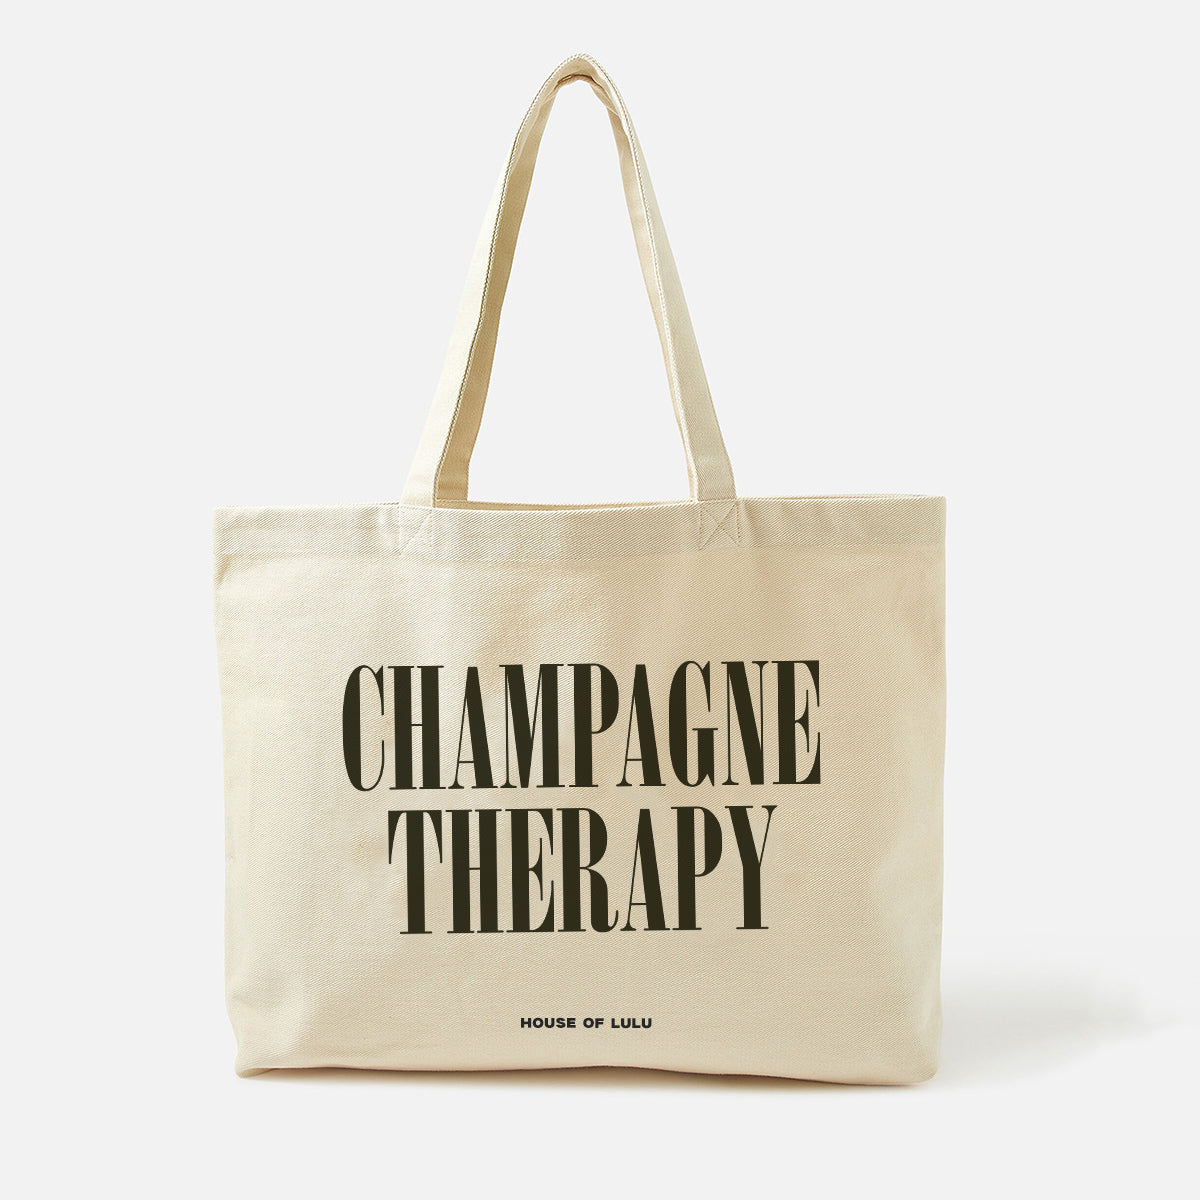 Champagne Therapy Tote Bag